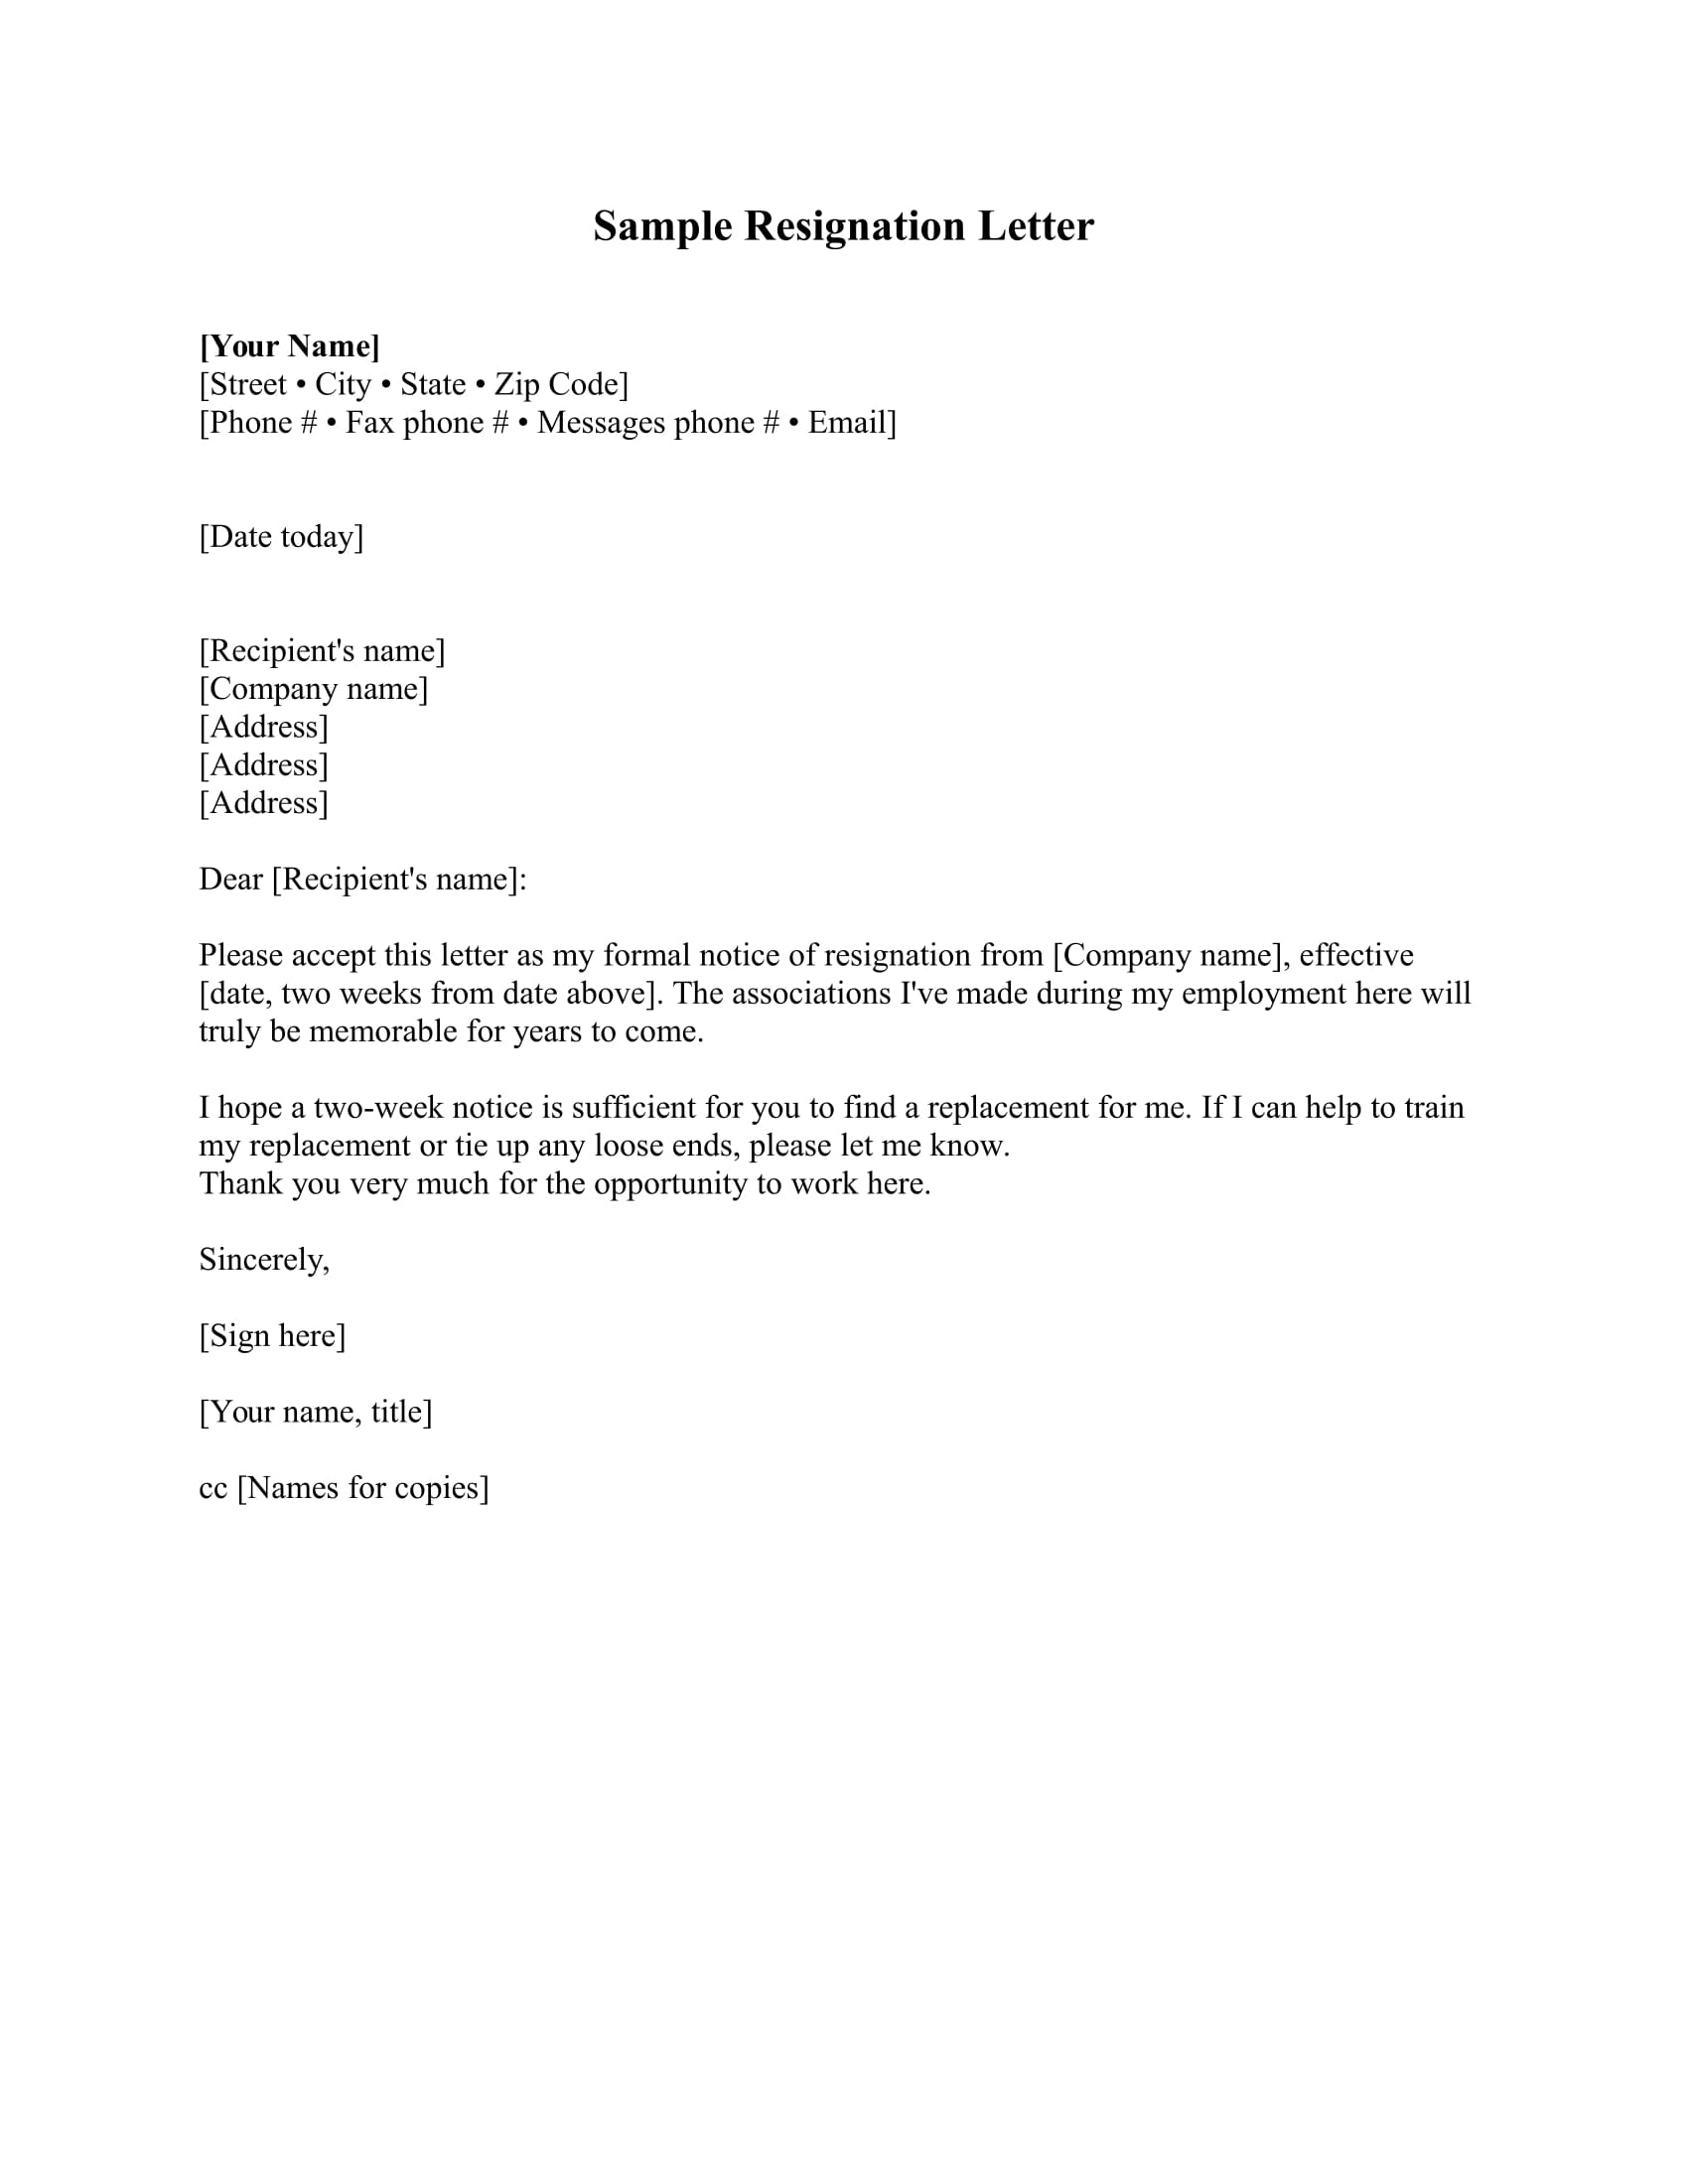 Sample Resignation Letter To Manager from images.examples.com